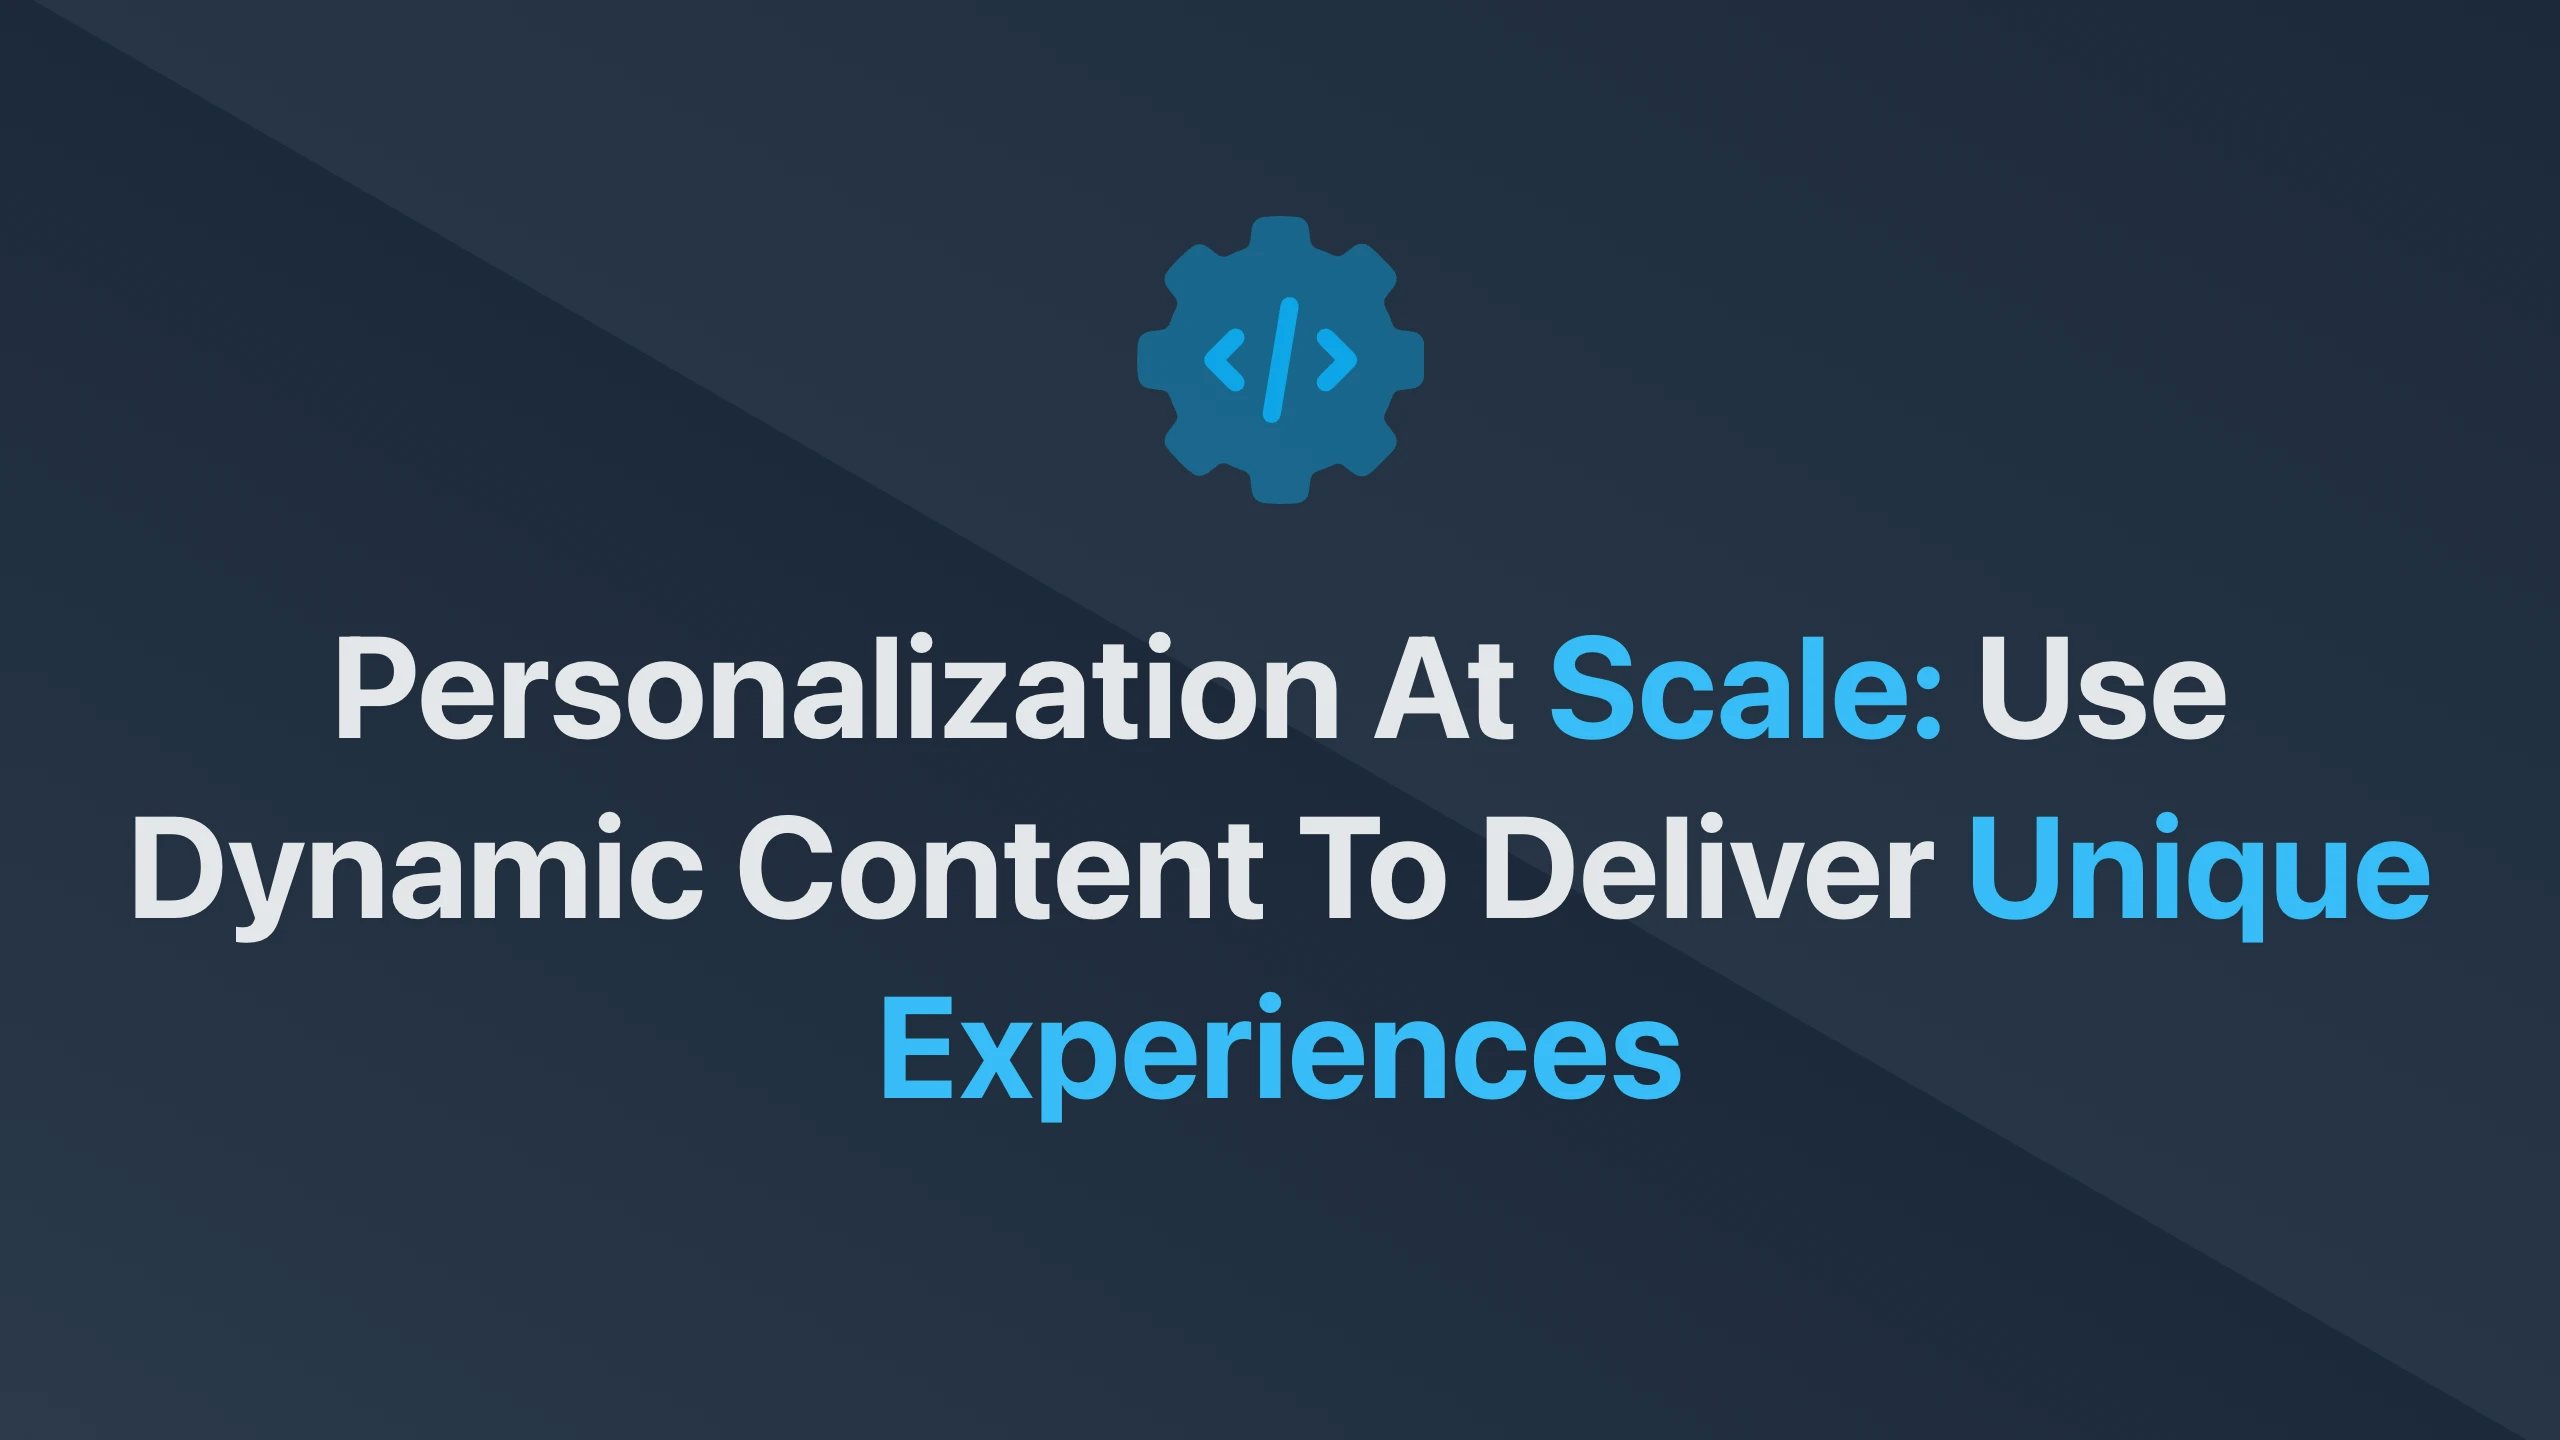 Cover Image for Personalization at Scale: Use Dynamic Content to Deliver Unique Experiences